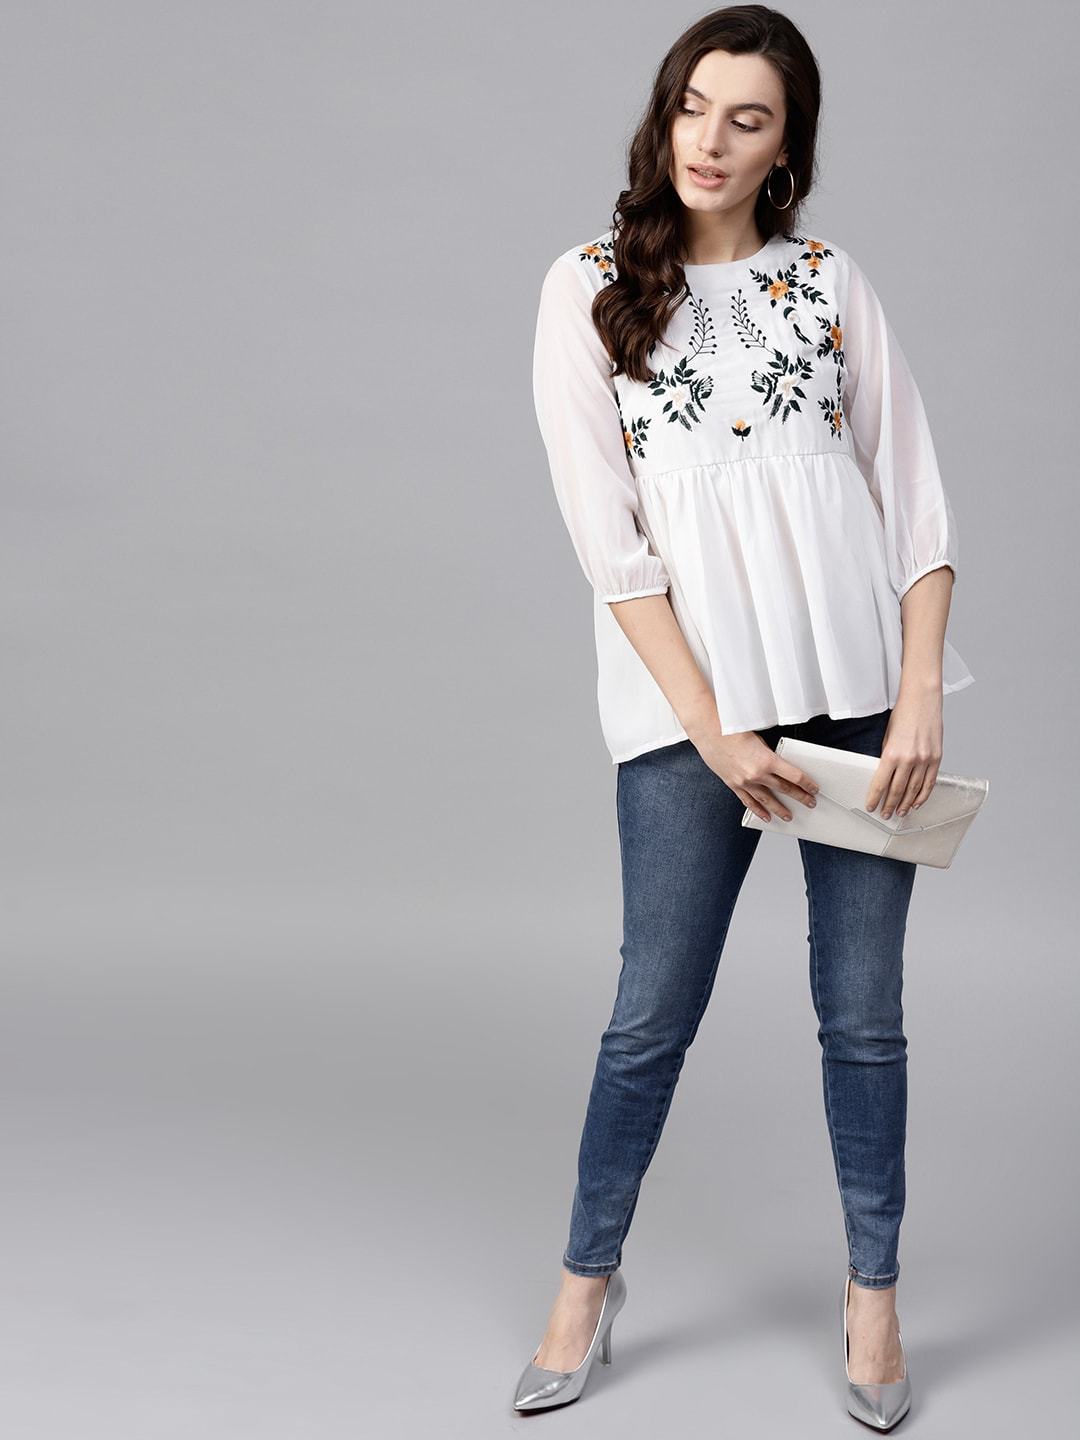 Women's White Floral Embroidered Sheer Top - Pannkh